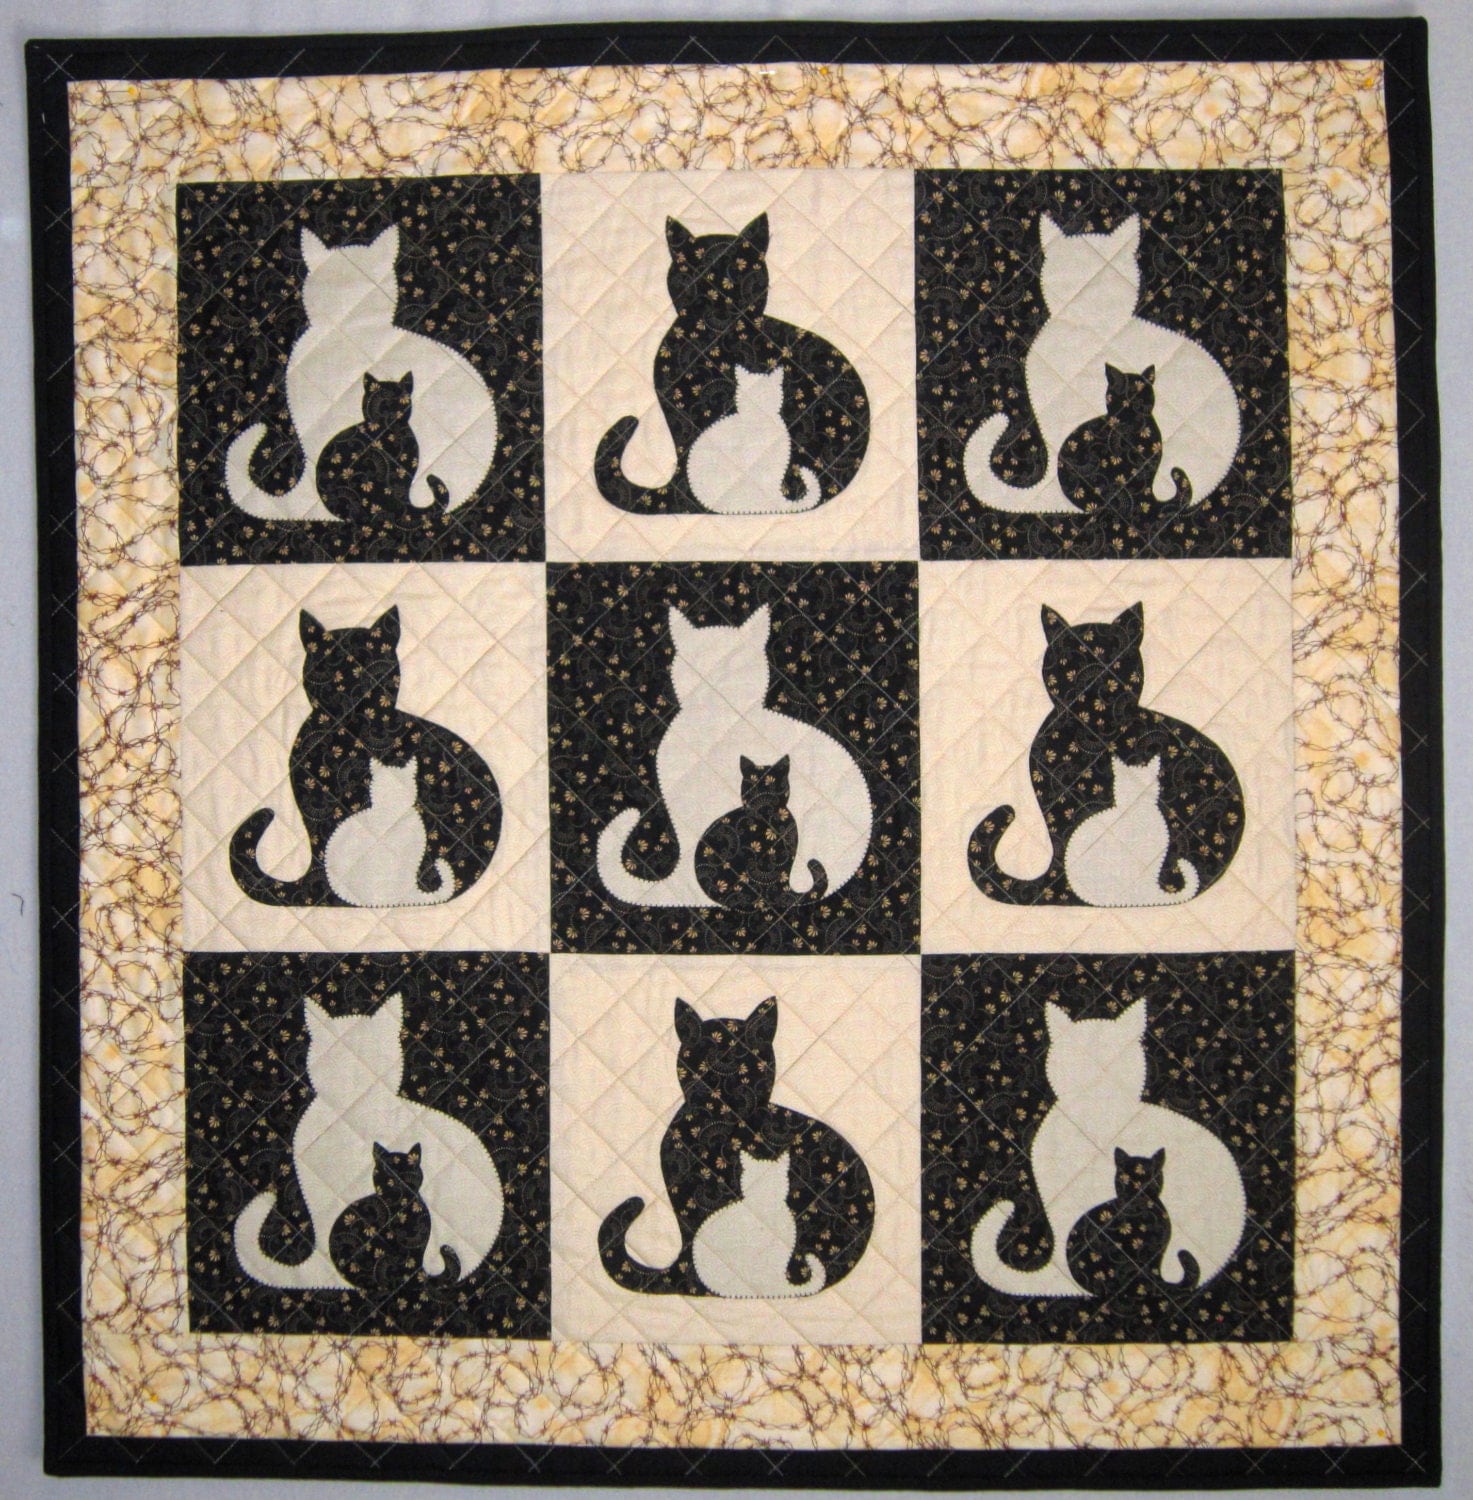 sidekick-cat-applique-quilt-pattern-from-quilts-by-elena